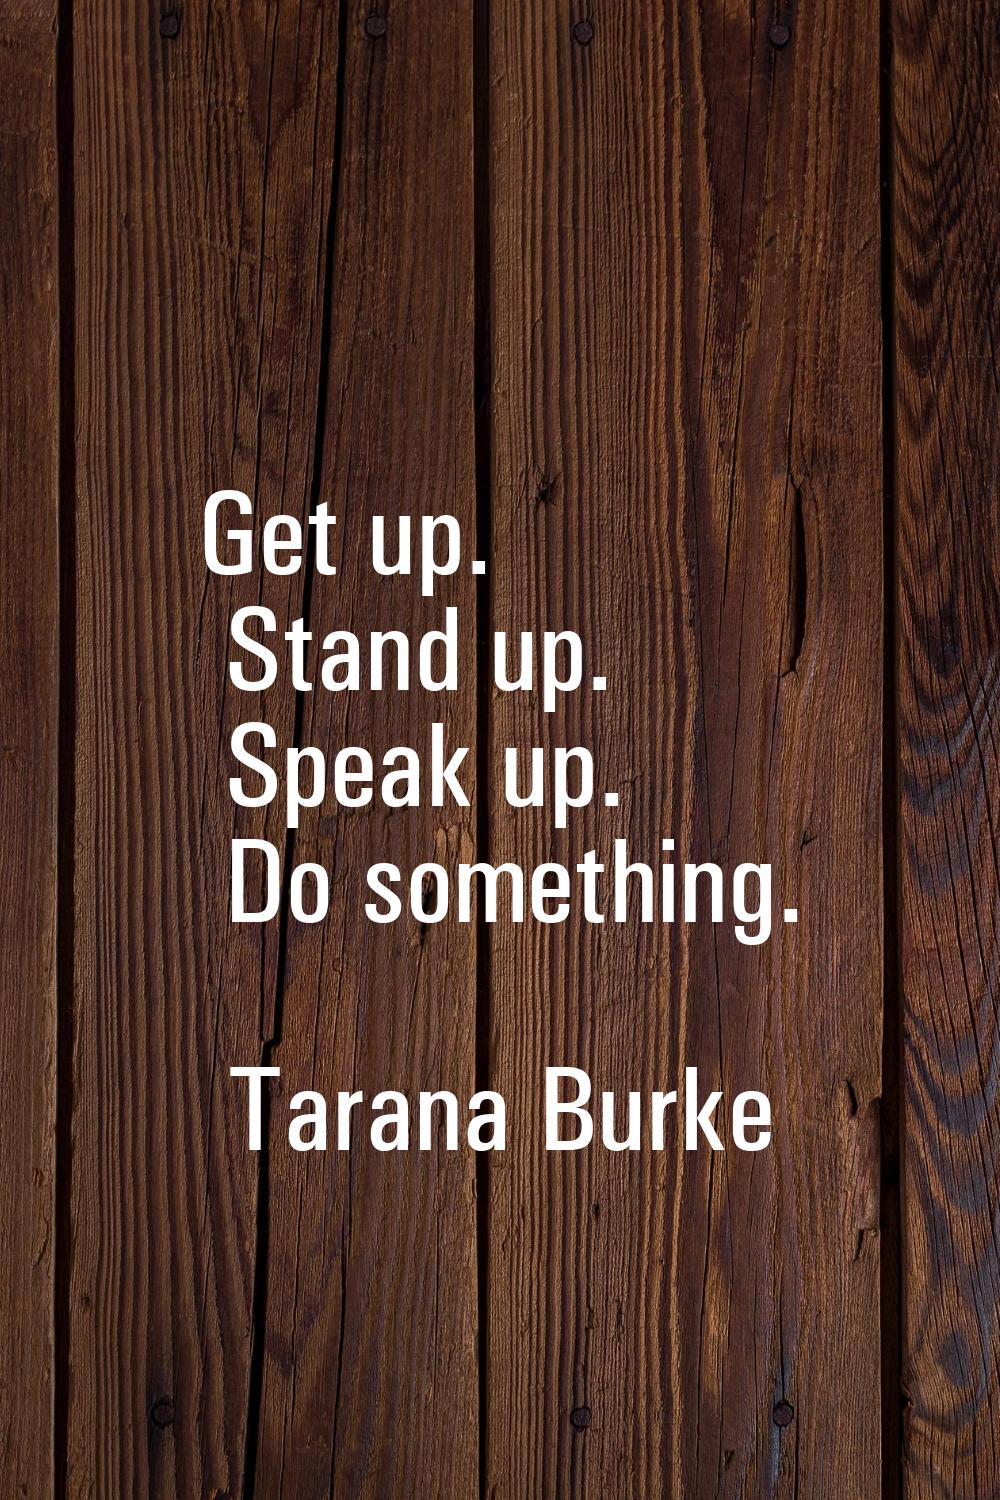 Get up. Stand up. Speak up. Do something.